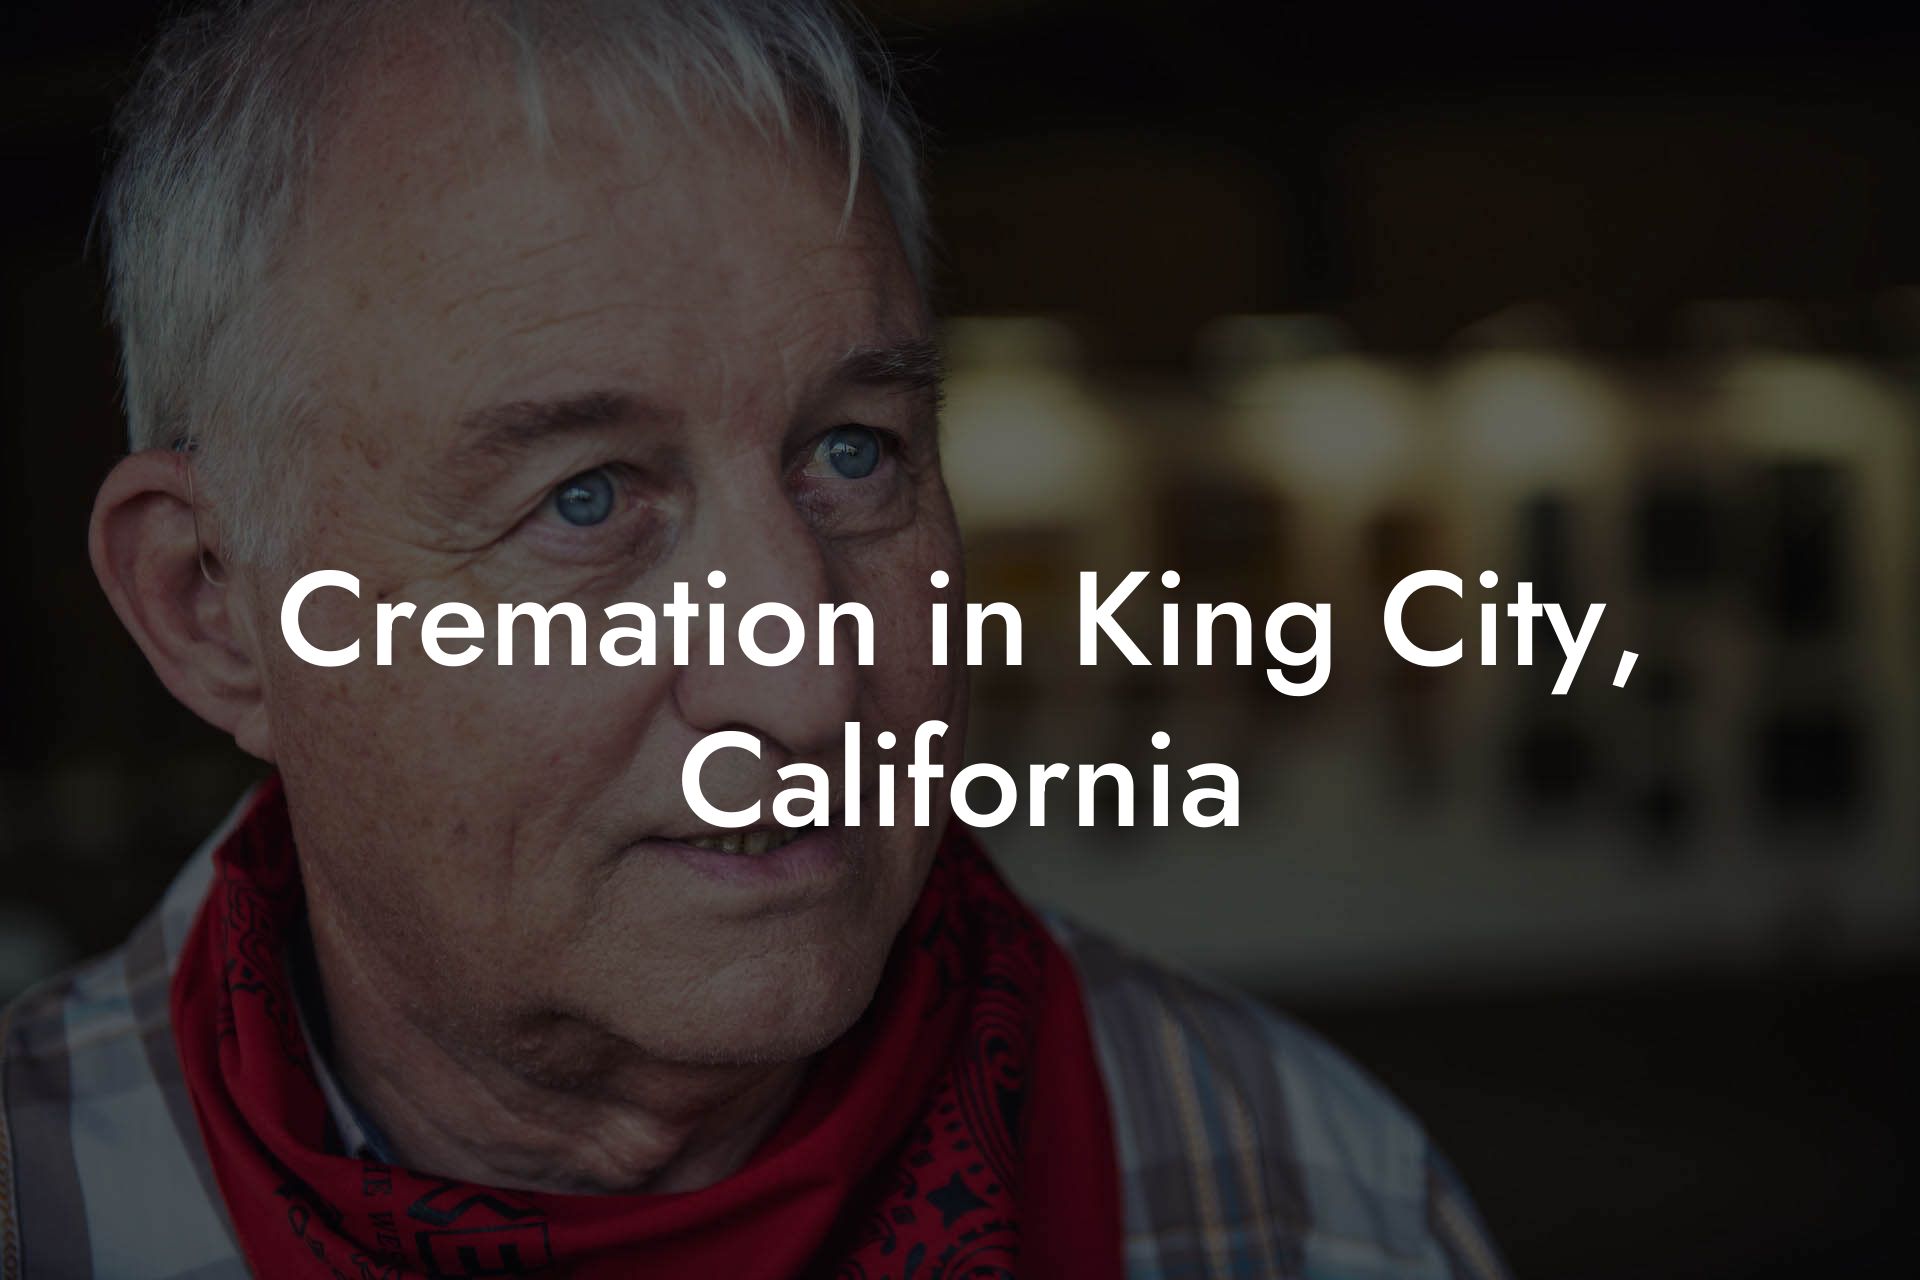 Cremation in King City, California